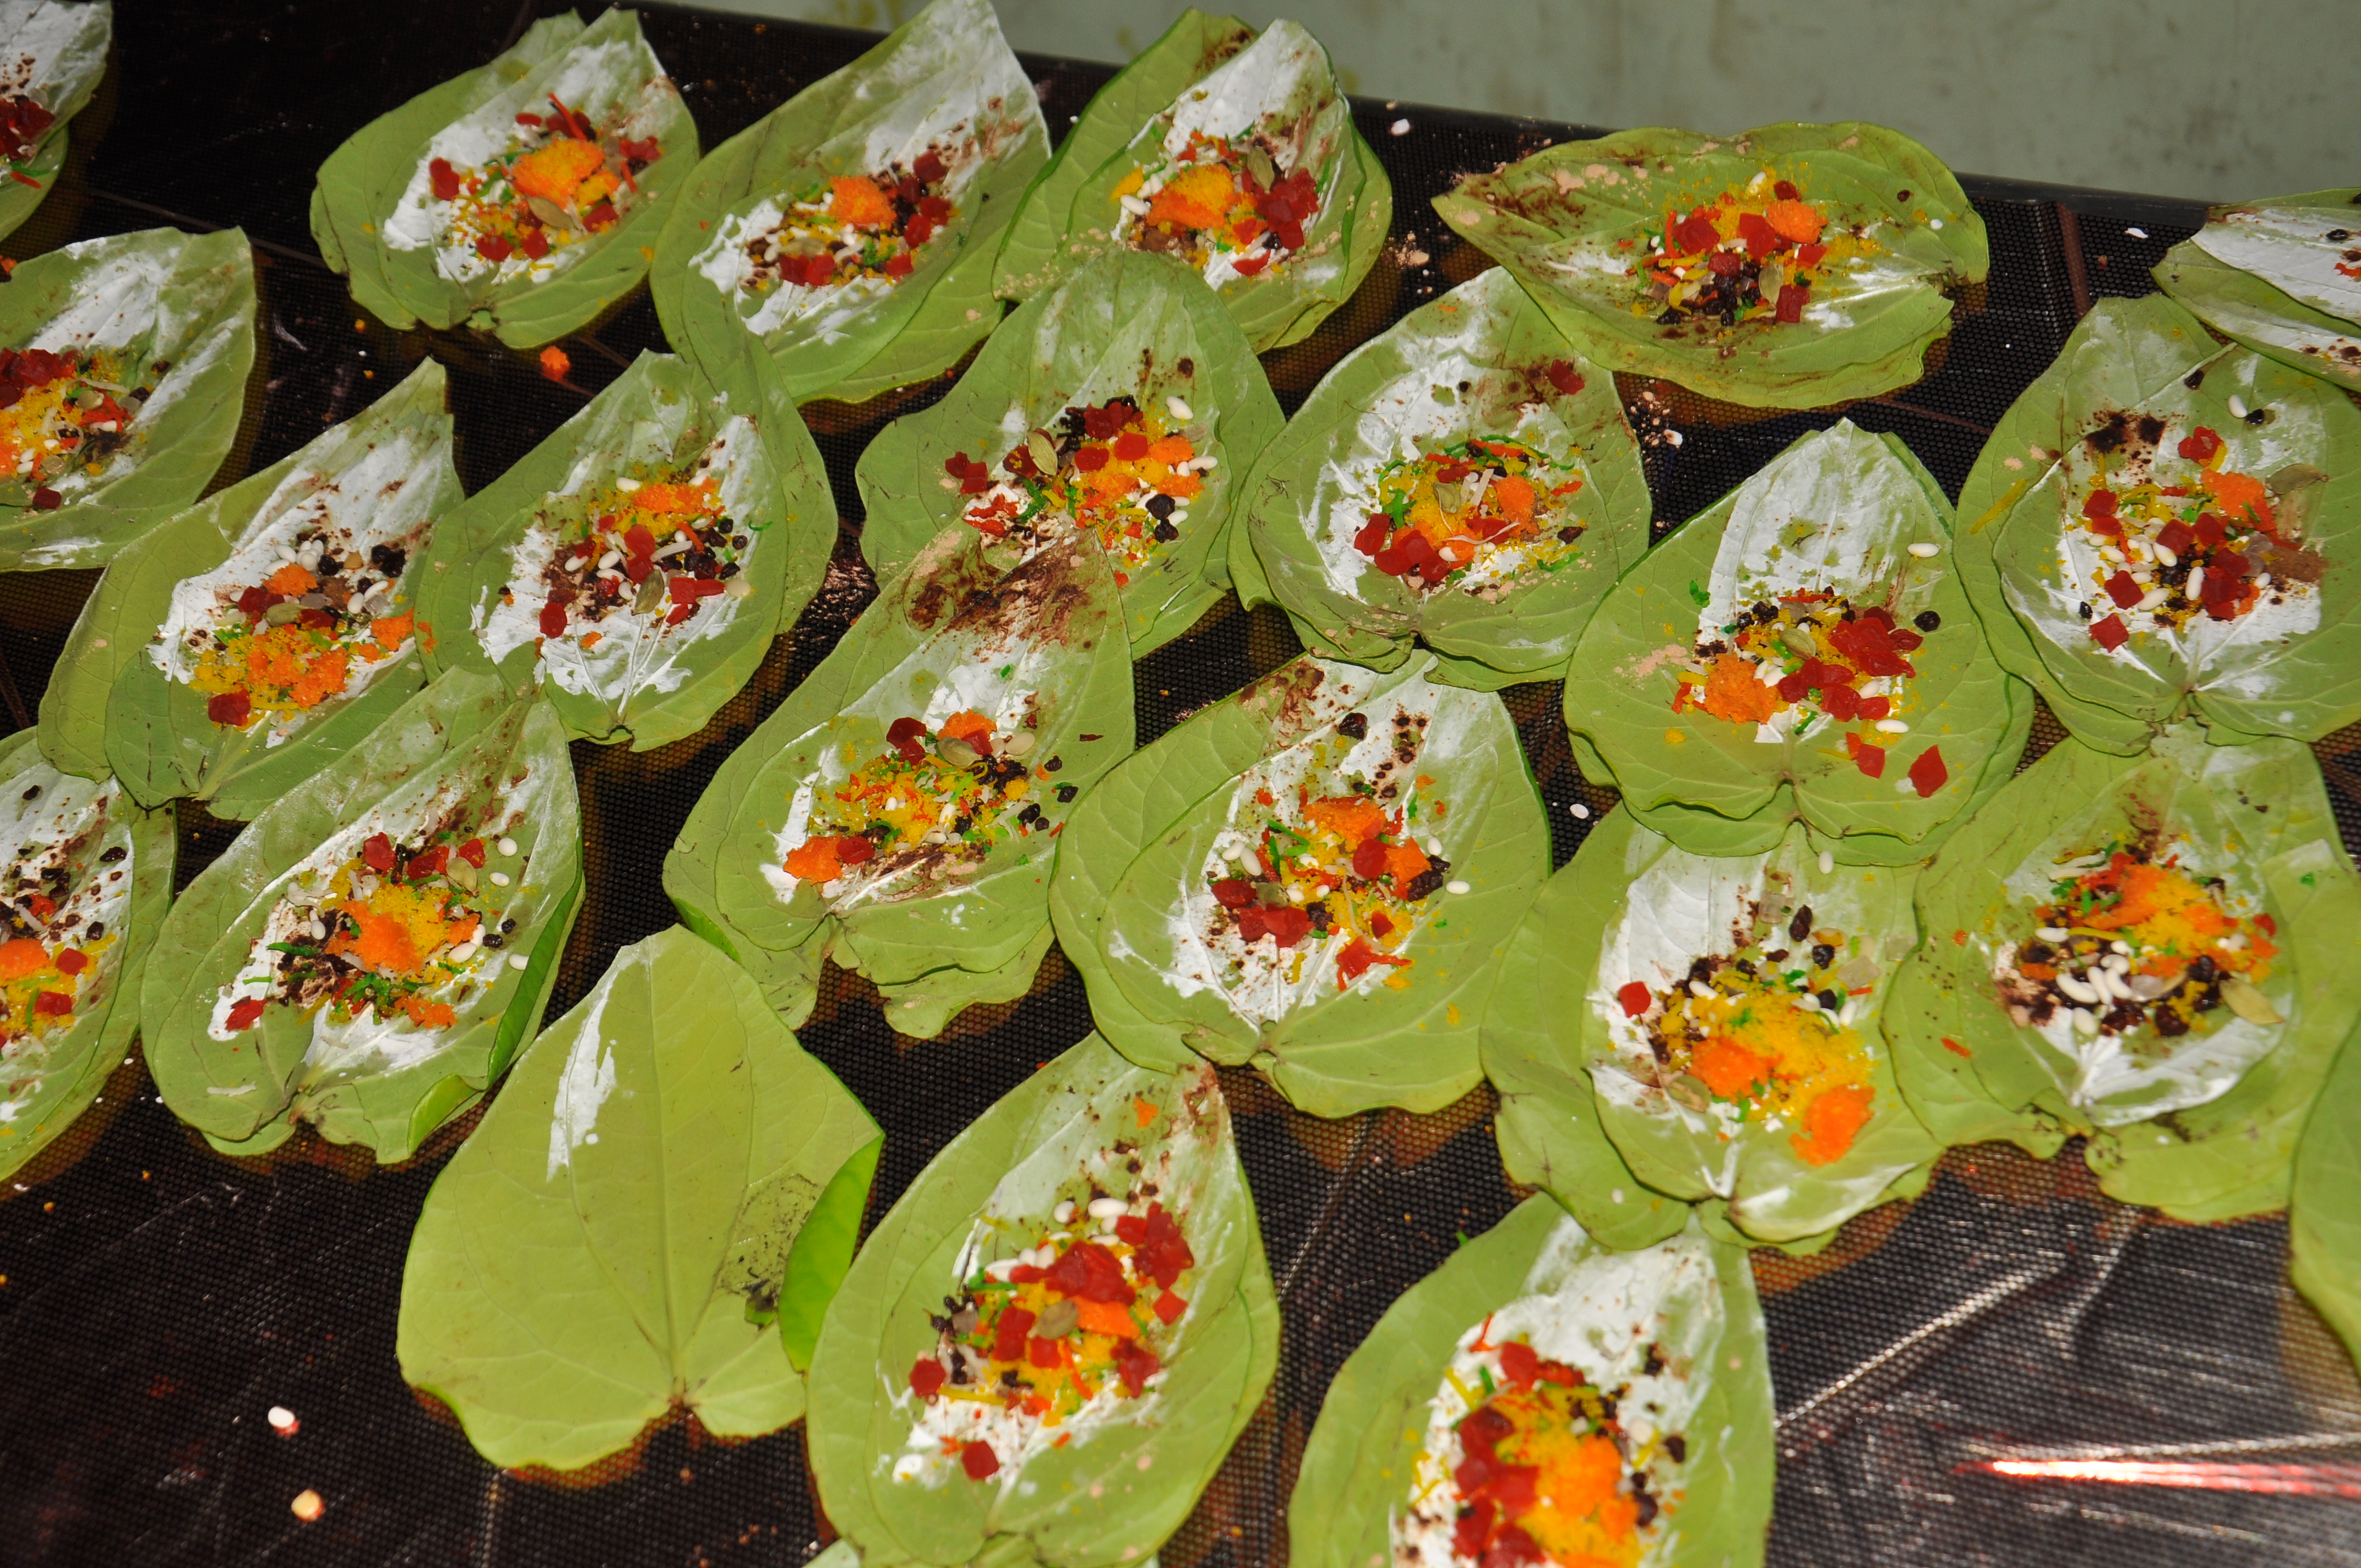 Are you a Pan lover? checkout why you should have paan after meals